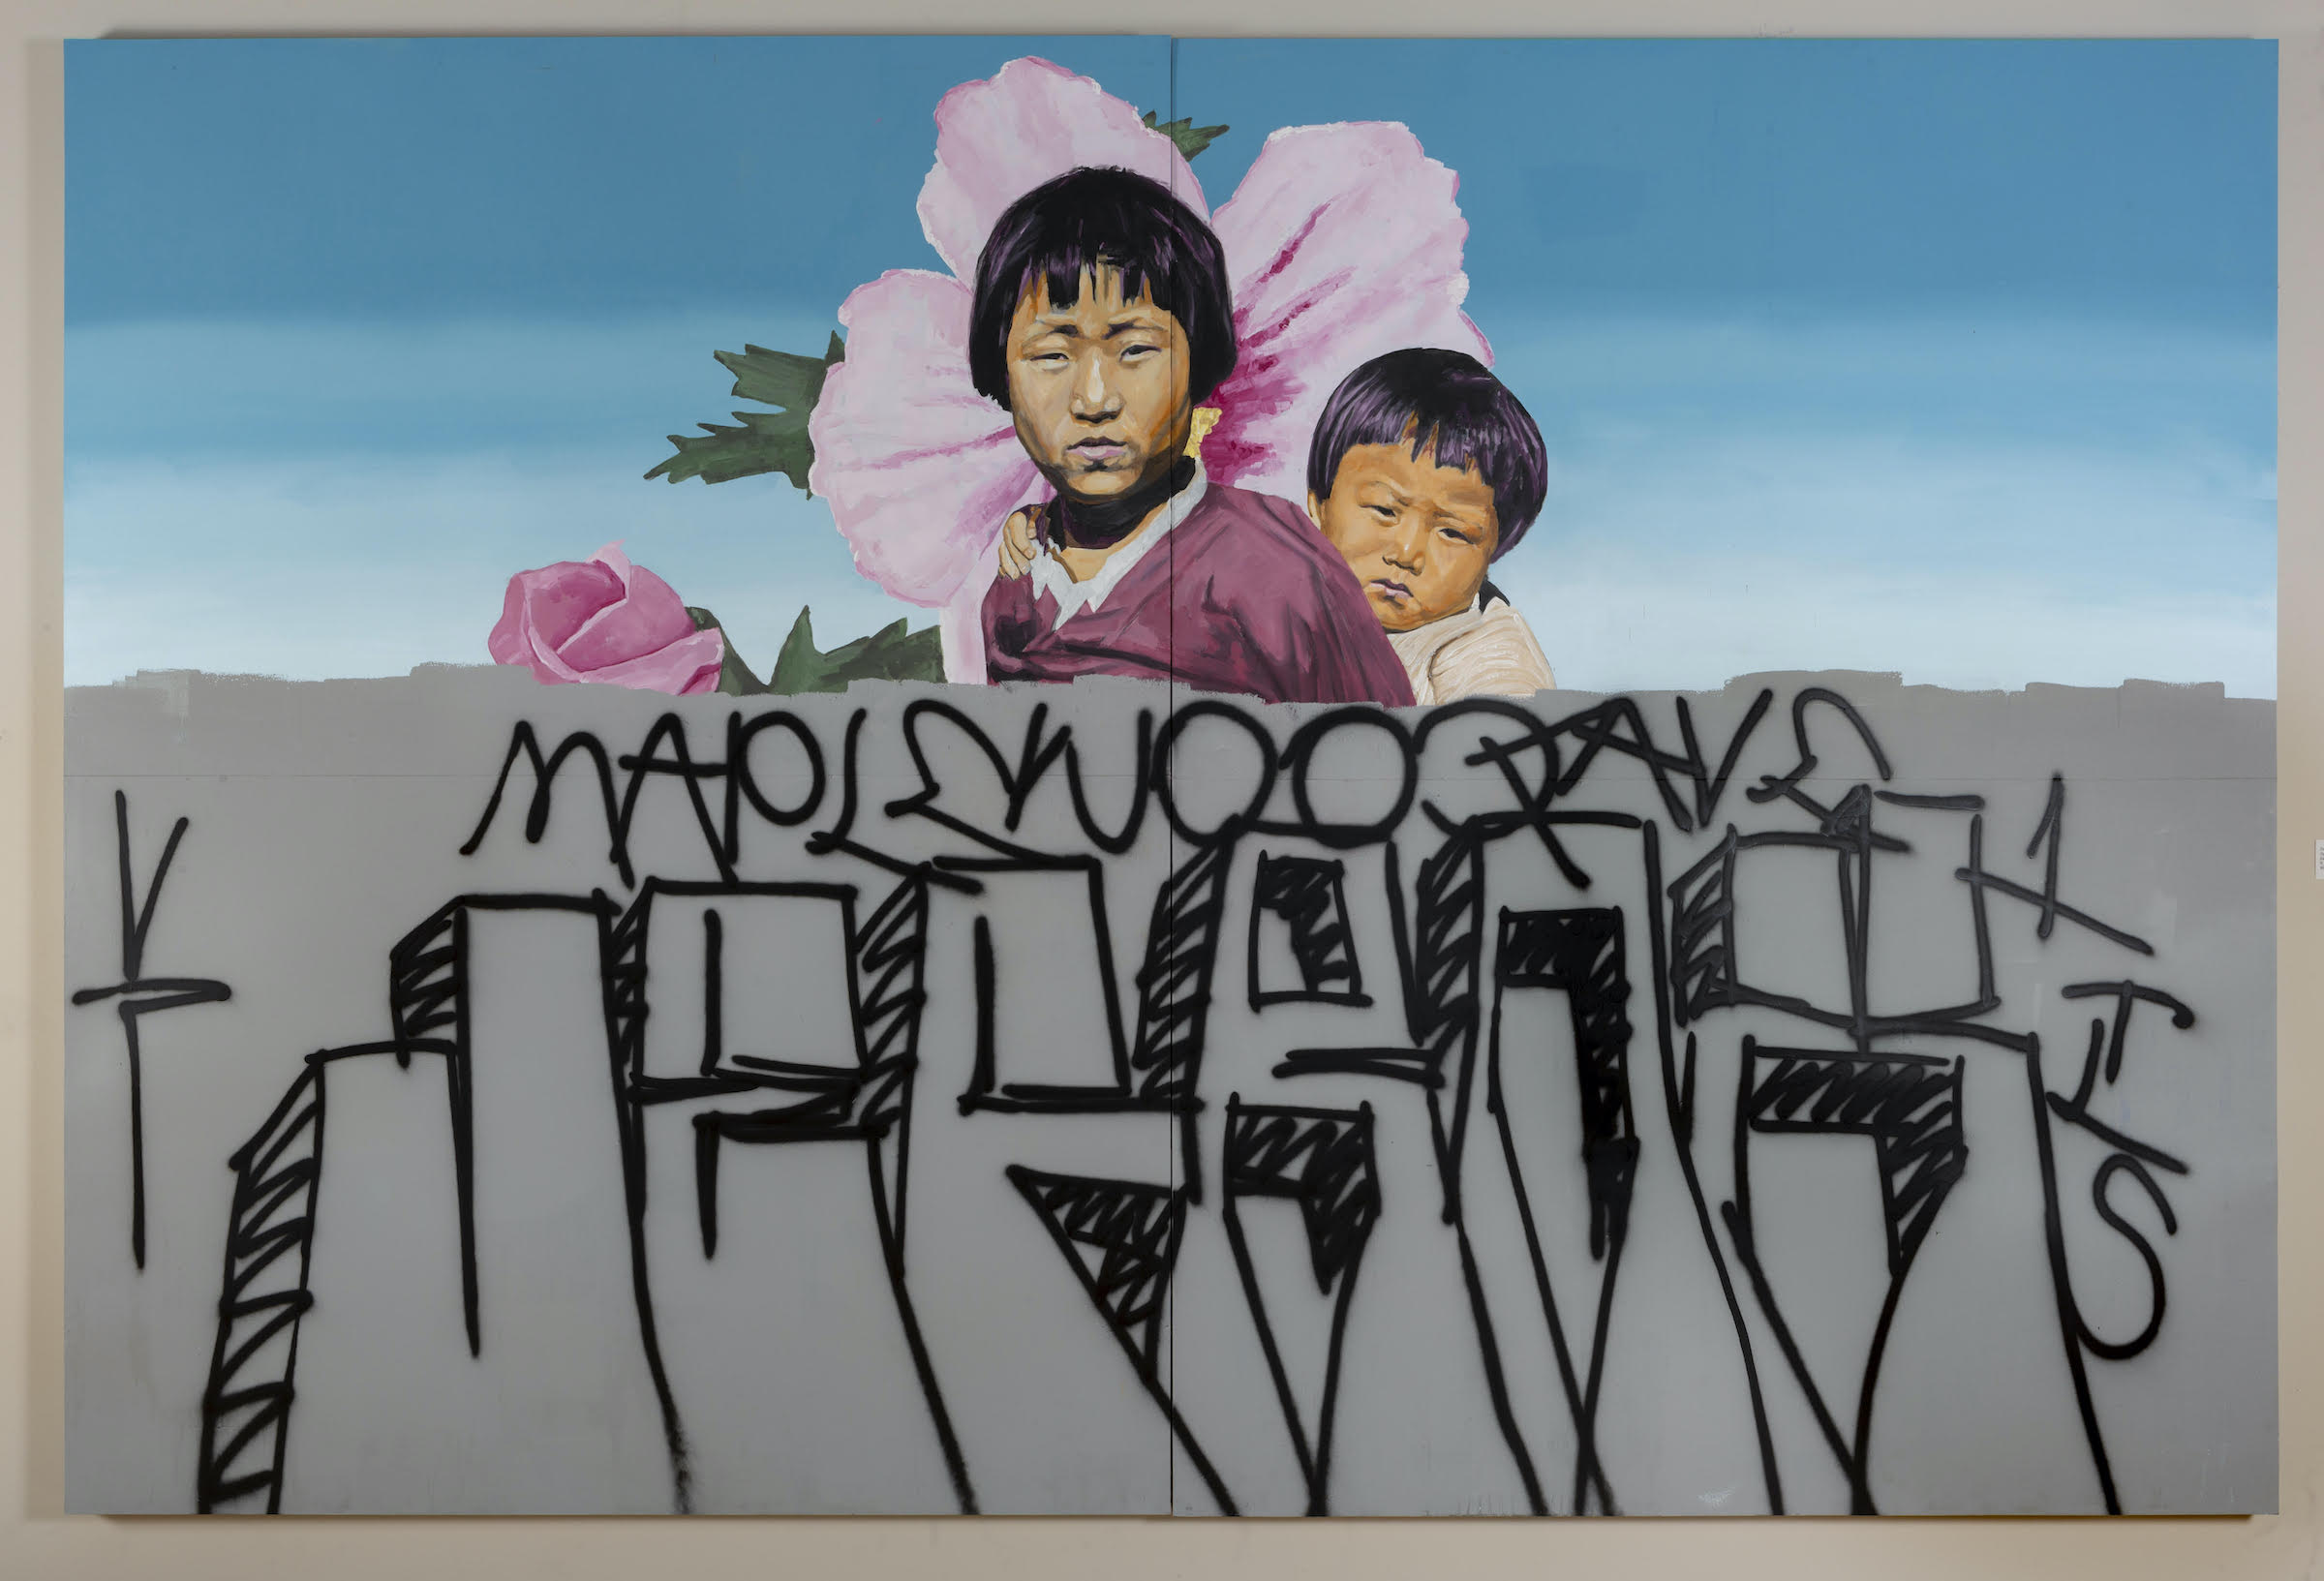 Painting of a young asian girl and boy with pink flowers in the background, with dark grey paint and graffiti covering the lower half of the painting